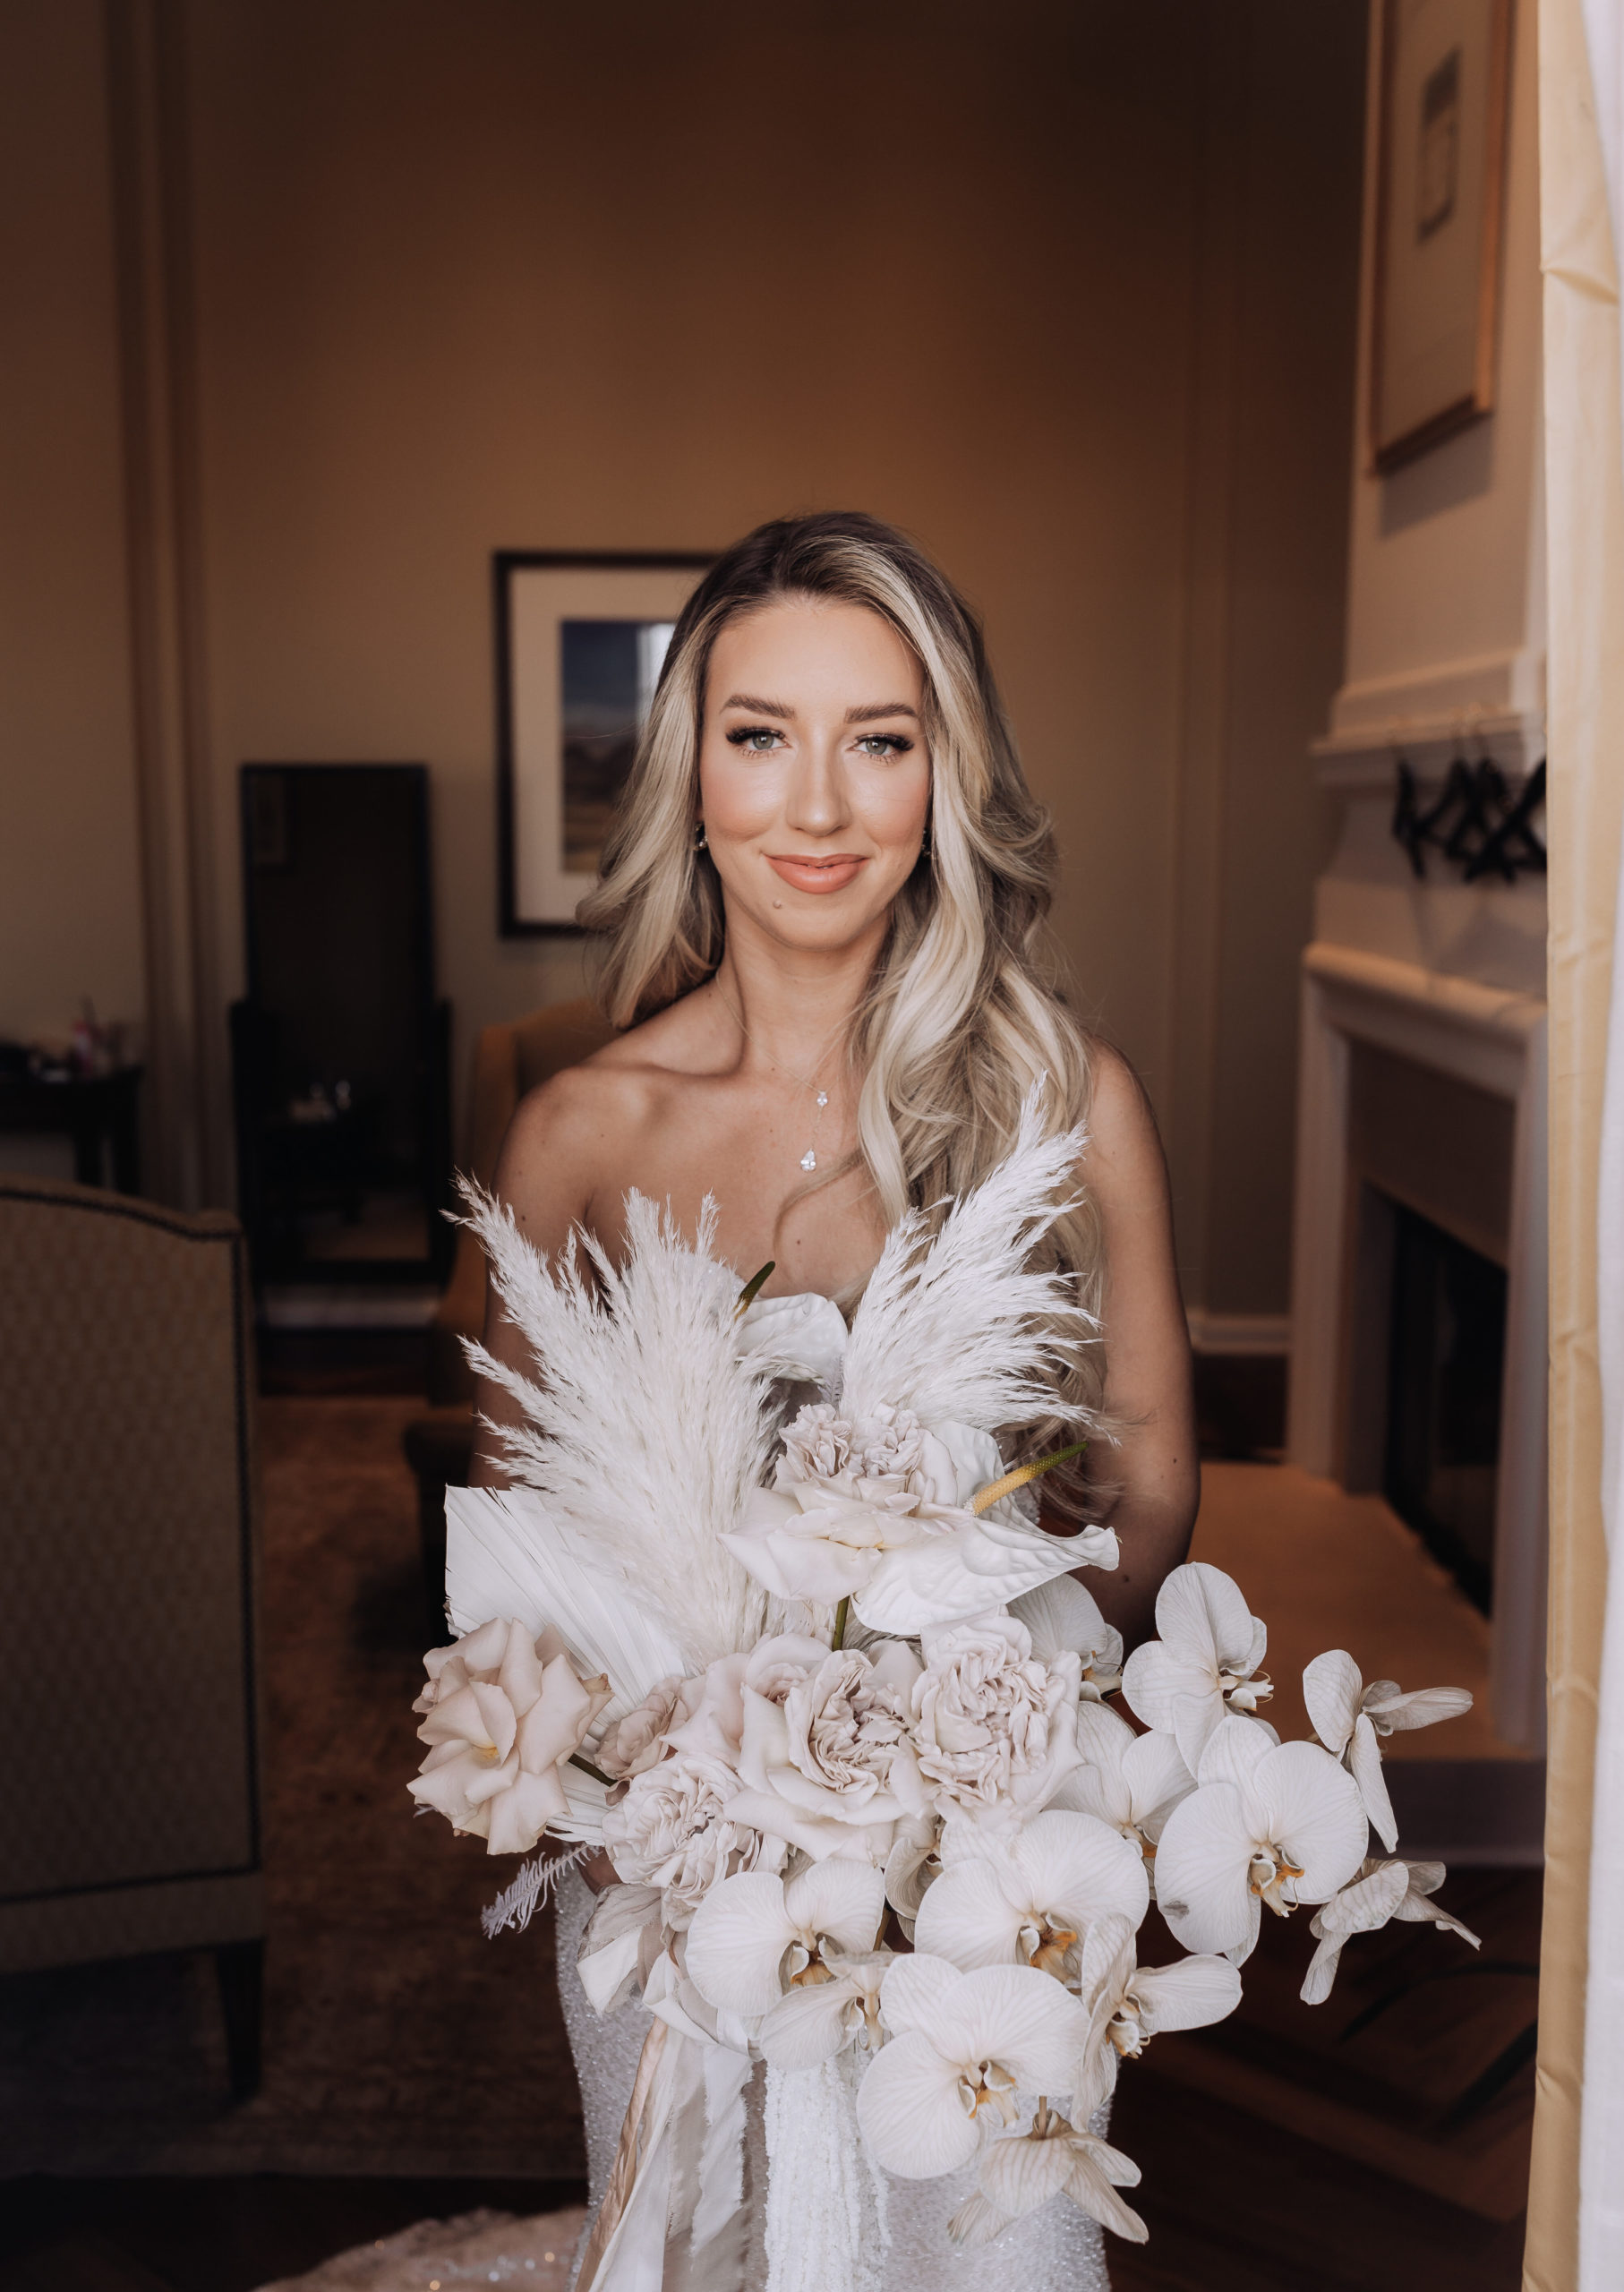 Lake Las Vegas Meets Modern Boho Bride. The beautiful bride standing in the doorway of the bridal suit ready to reveal her gorgeous lace corset wedding dress to her bridal party